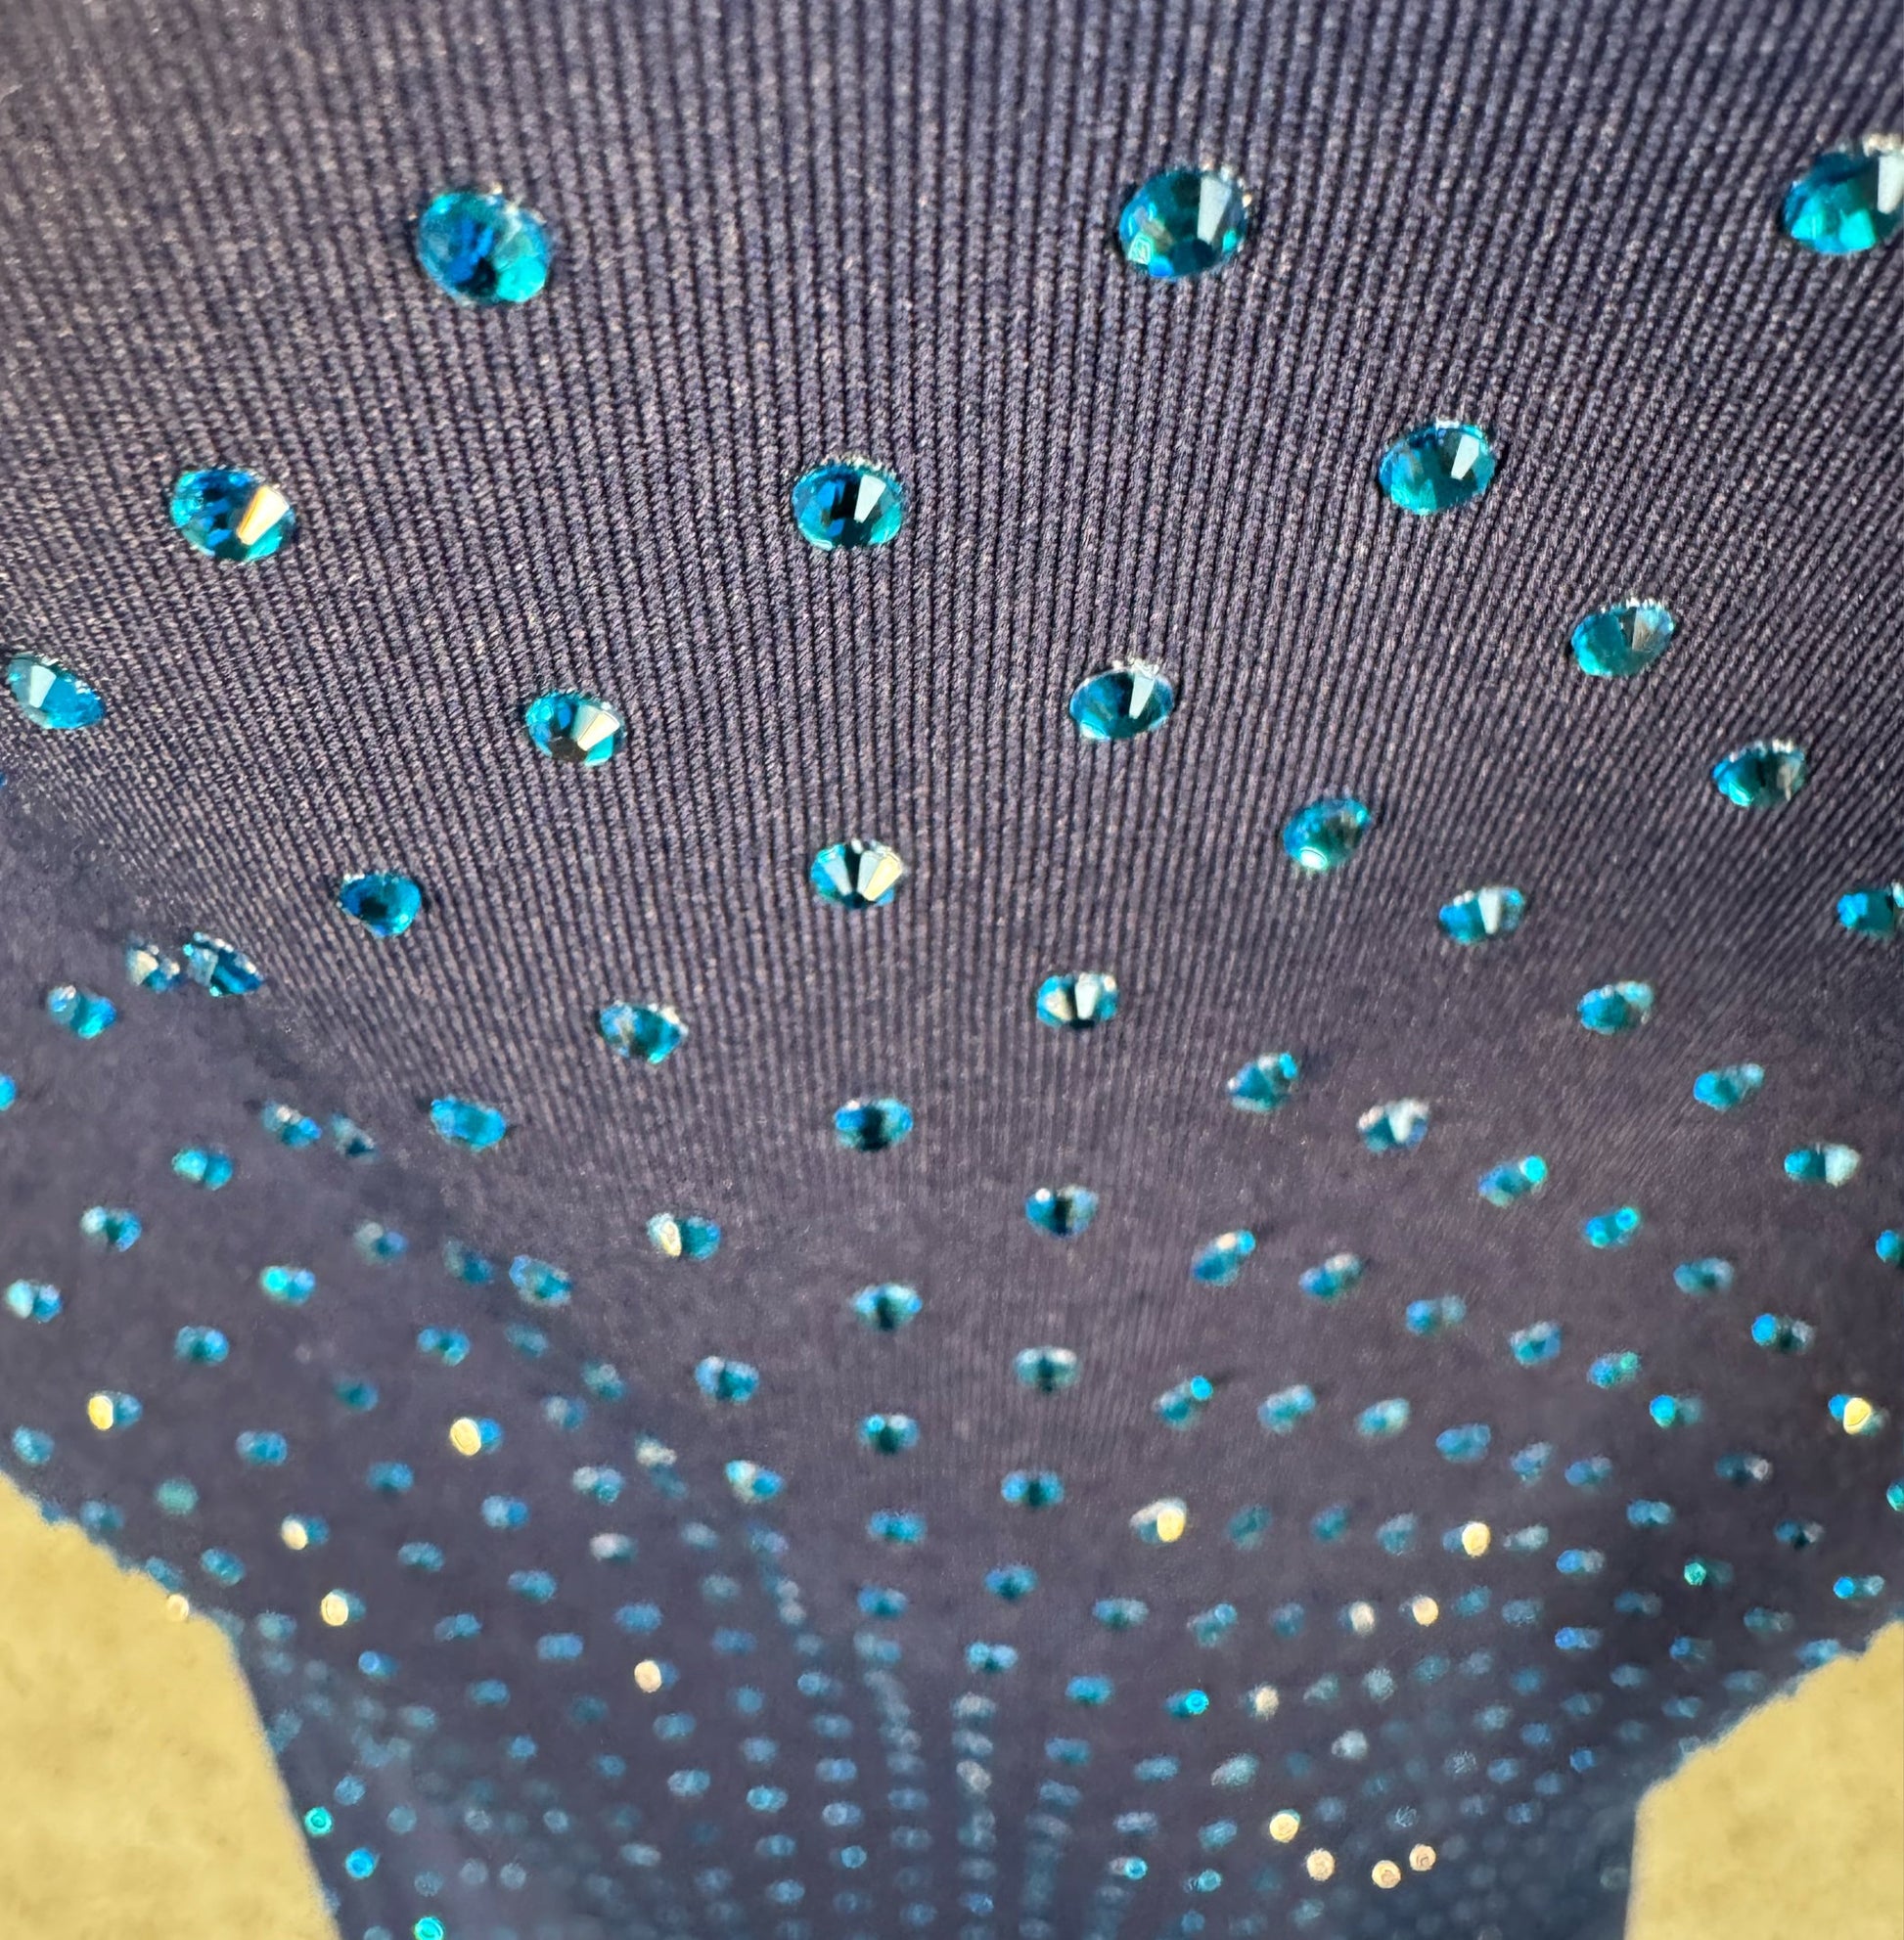 Looking down at Capri Blue Crystals on Navy Fabric Dotted T-shirt showing a close up of the rhinestone grid pattern and the sparkles as your focus shifts.